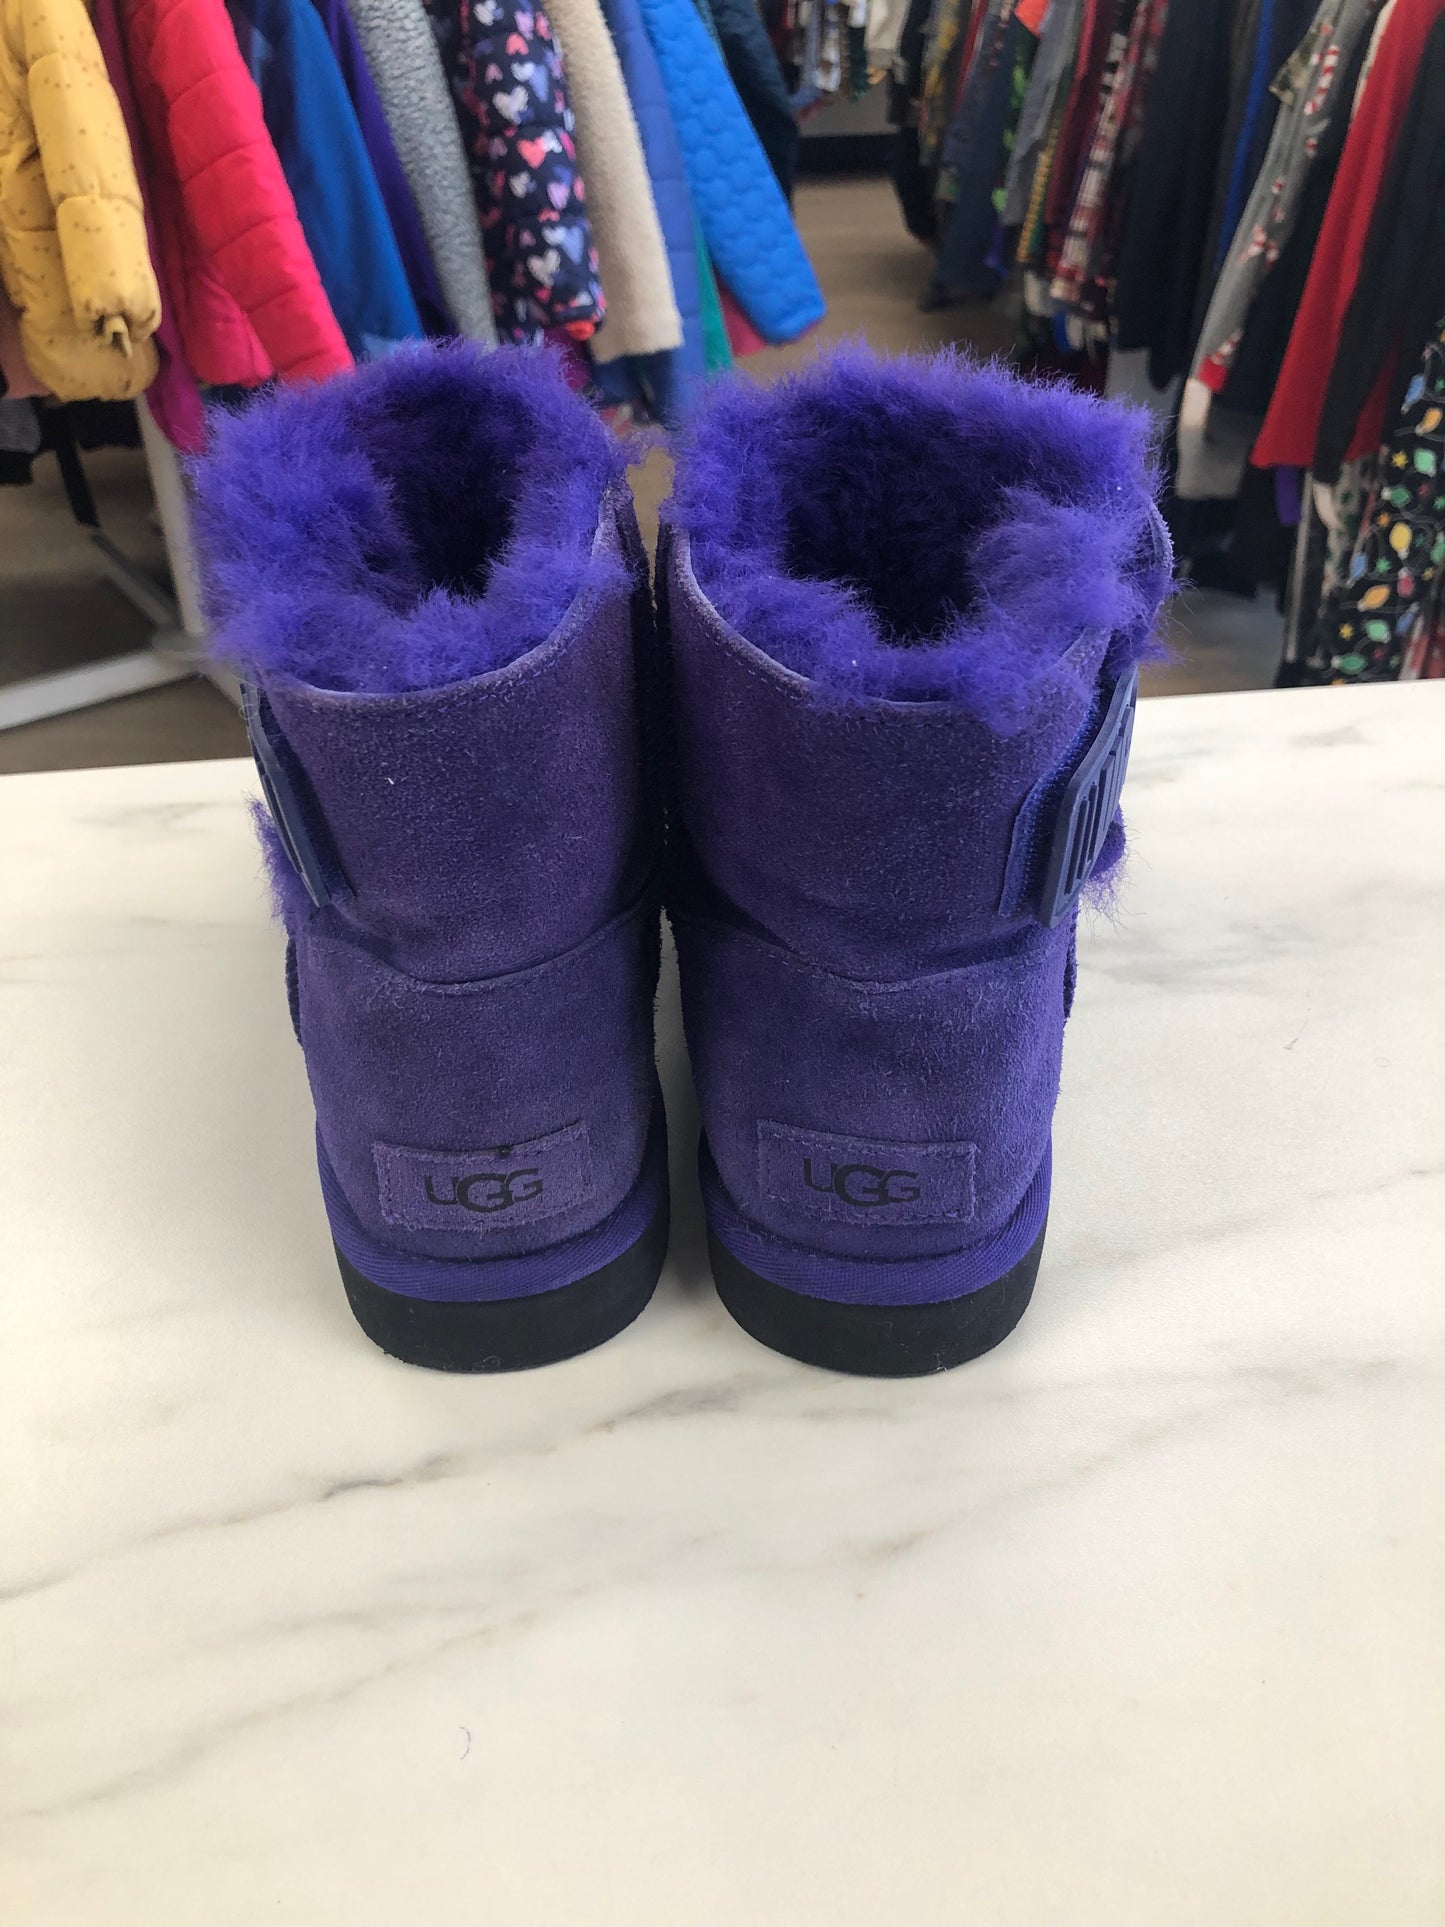 UGG Adult Size 7 Purple Shoes/Boots